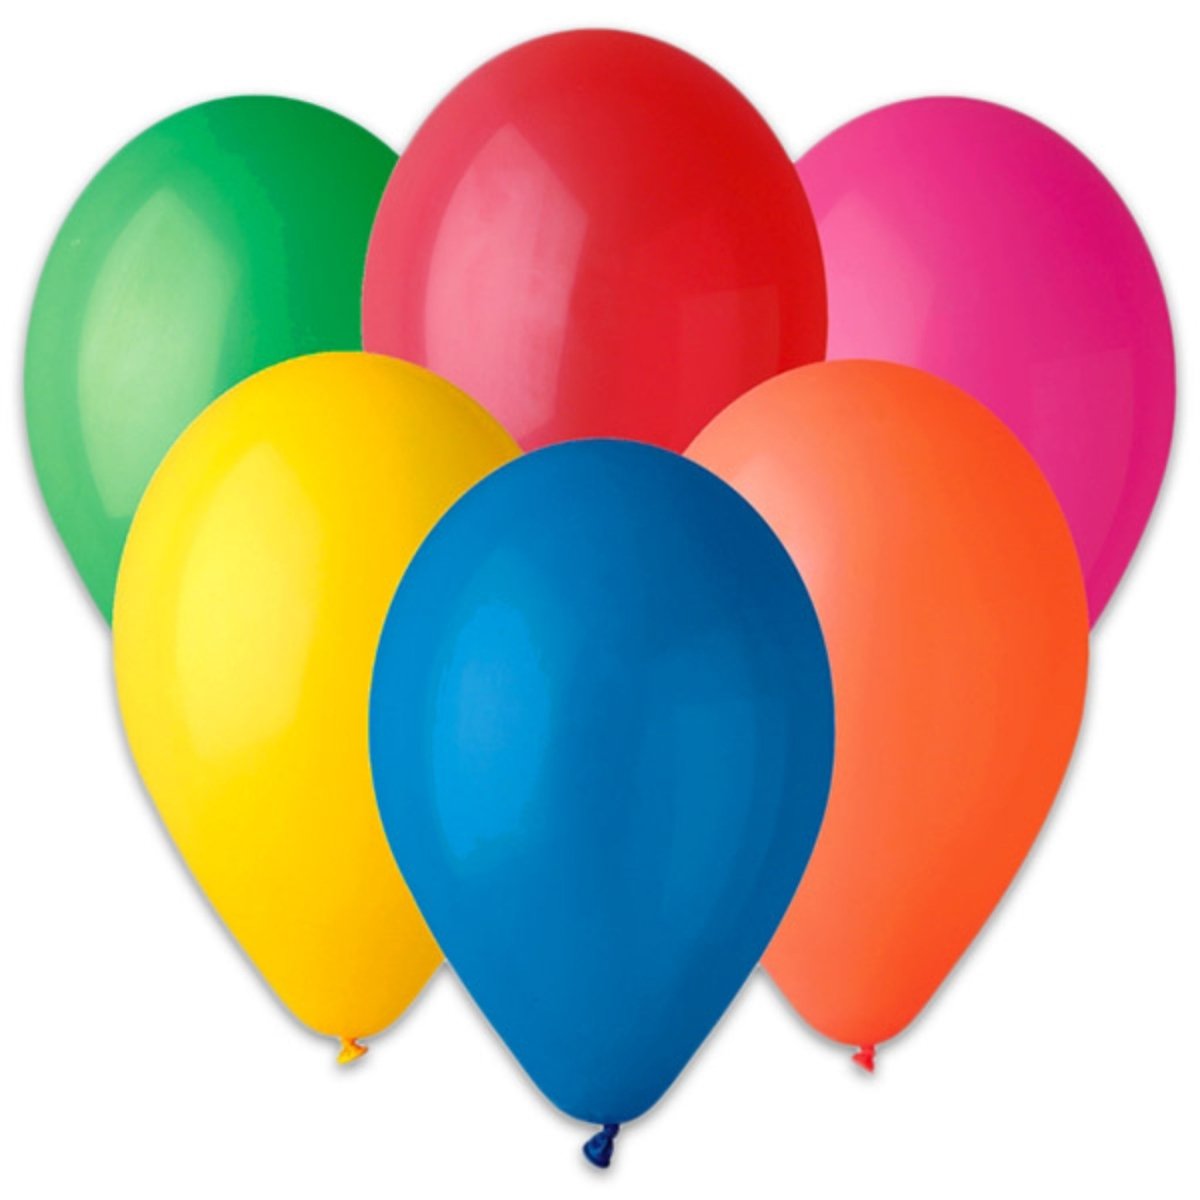 Multicoloured Balloons 25 Pack - 26cm/10" - Kids Party Craft